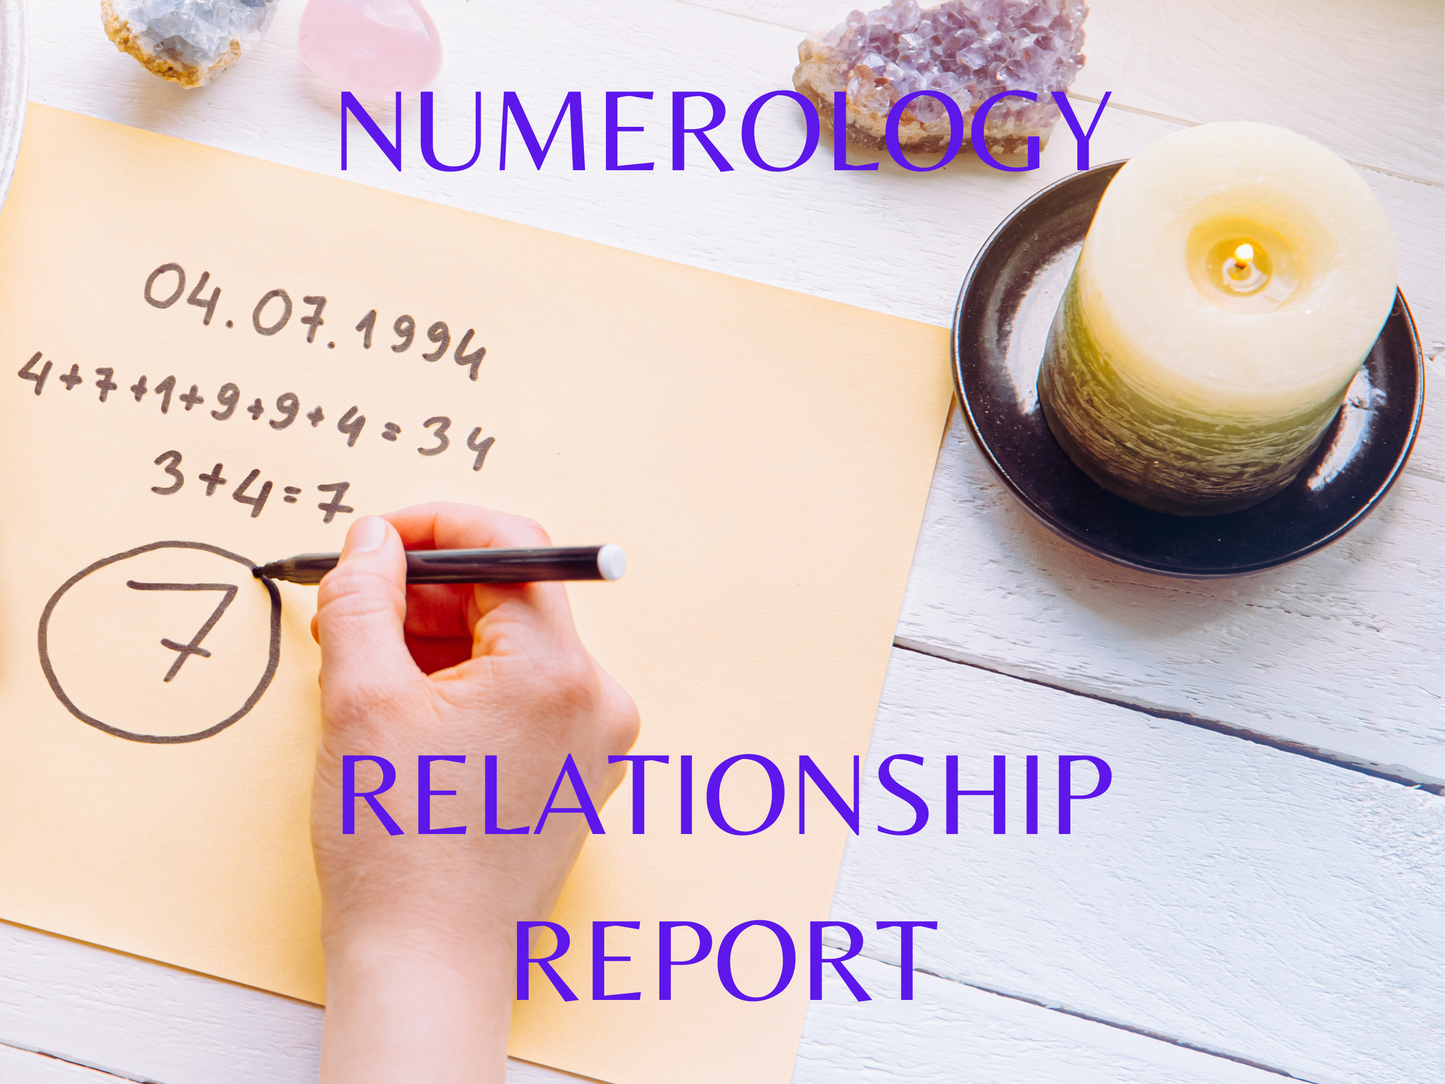 Relationship Report | Compatibility Report |Reports Received via Email | Receive within 24 to 48 hours